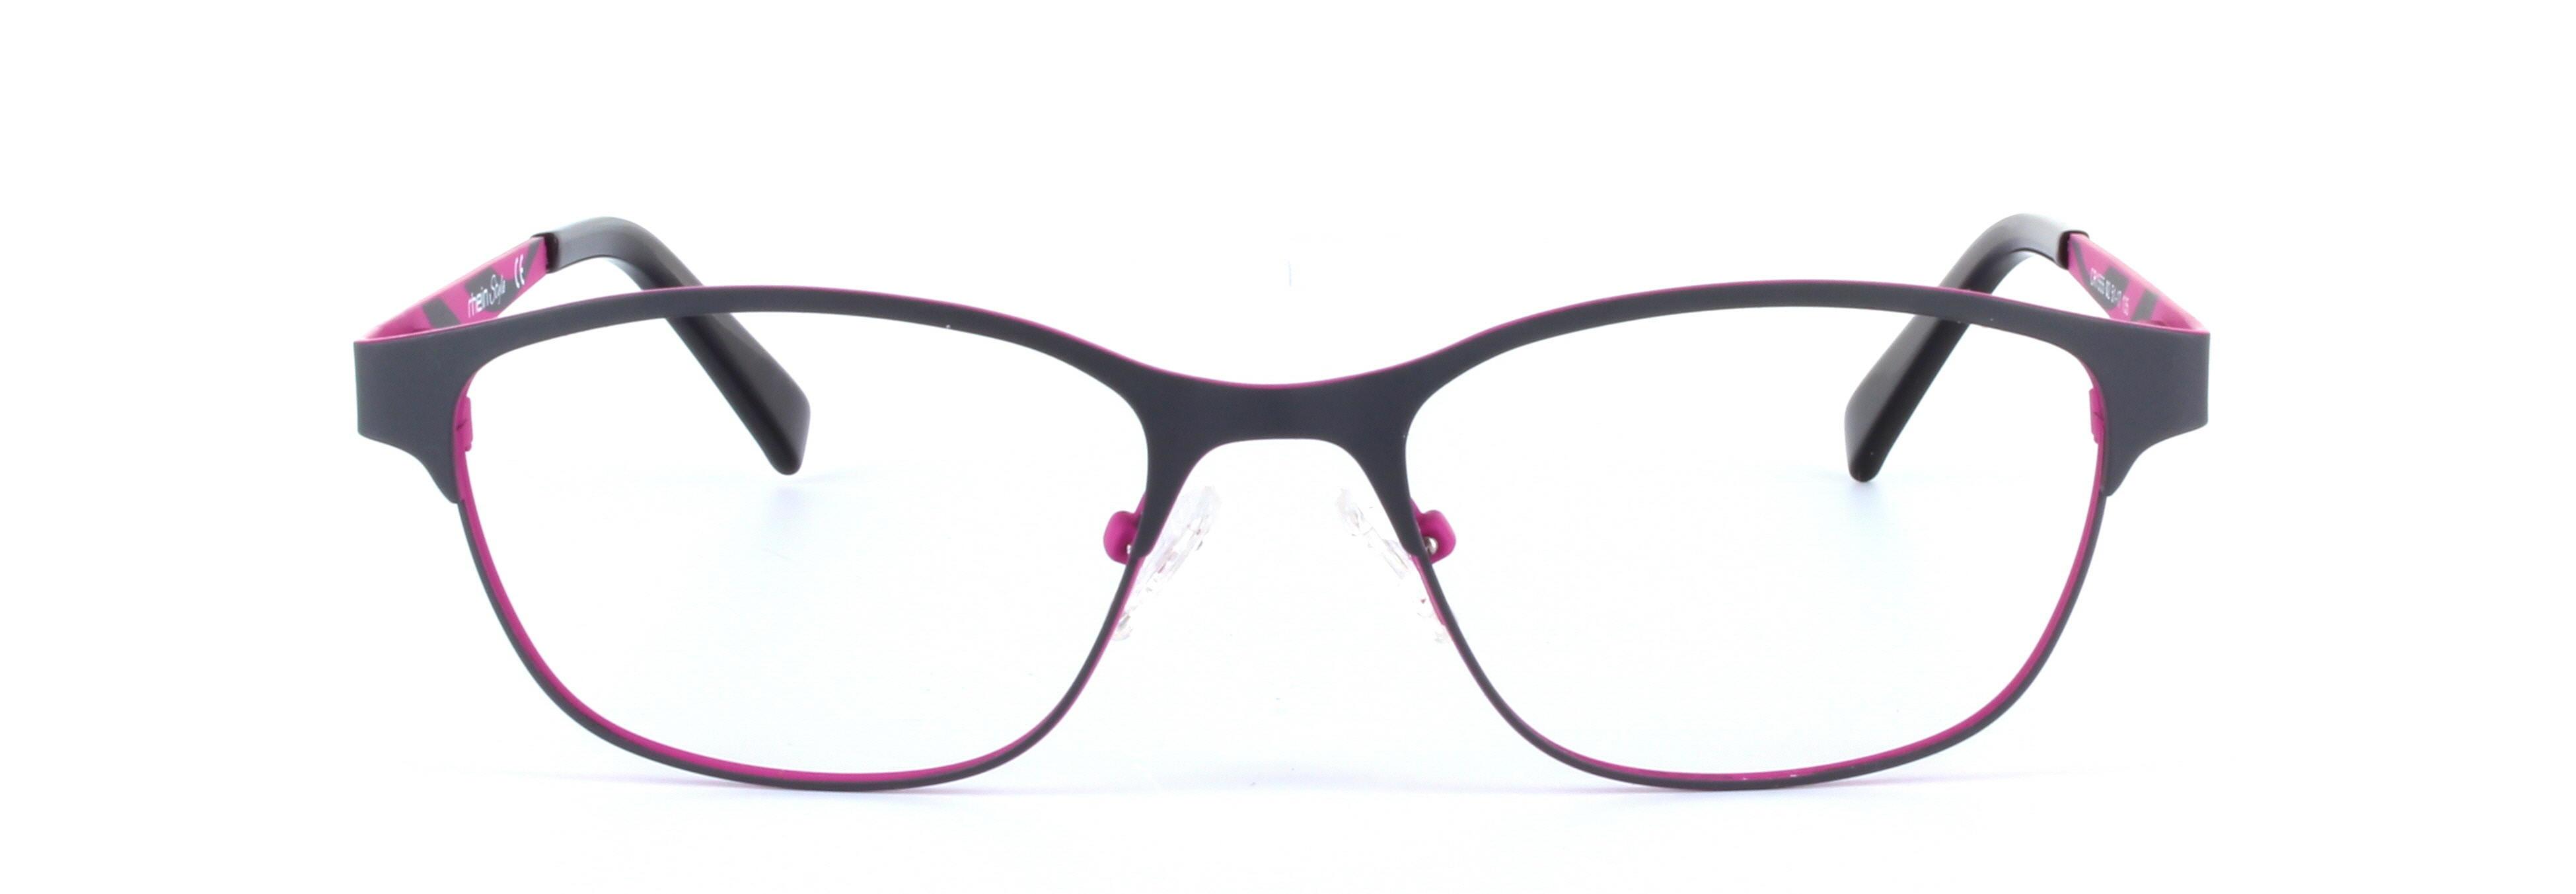 Lucie Brown and Pink Full Rim Oval Metal Glasses - Image View 4